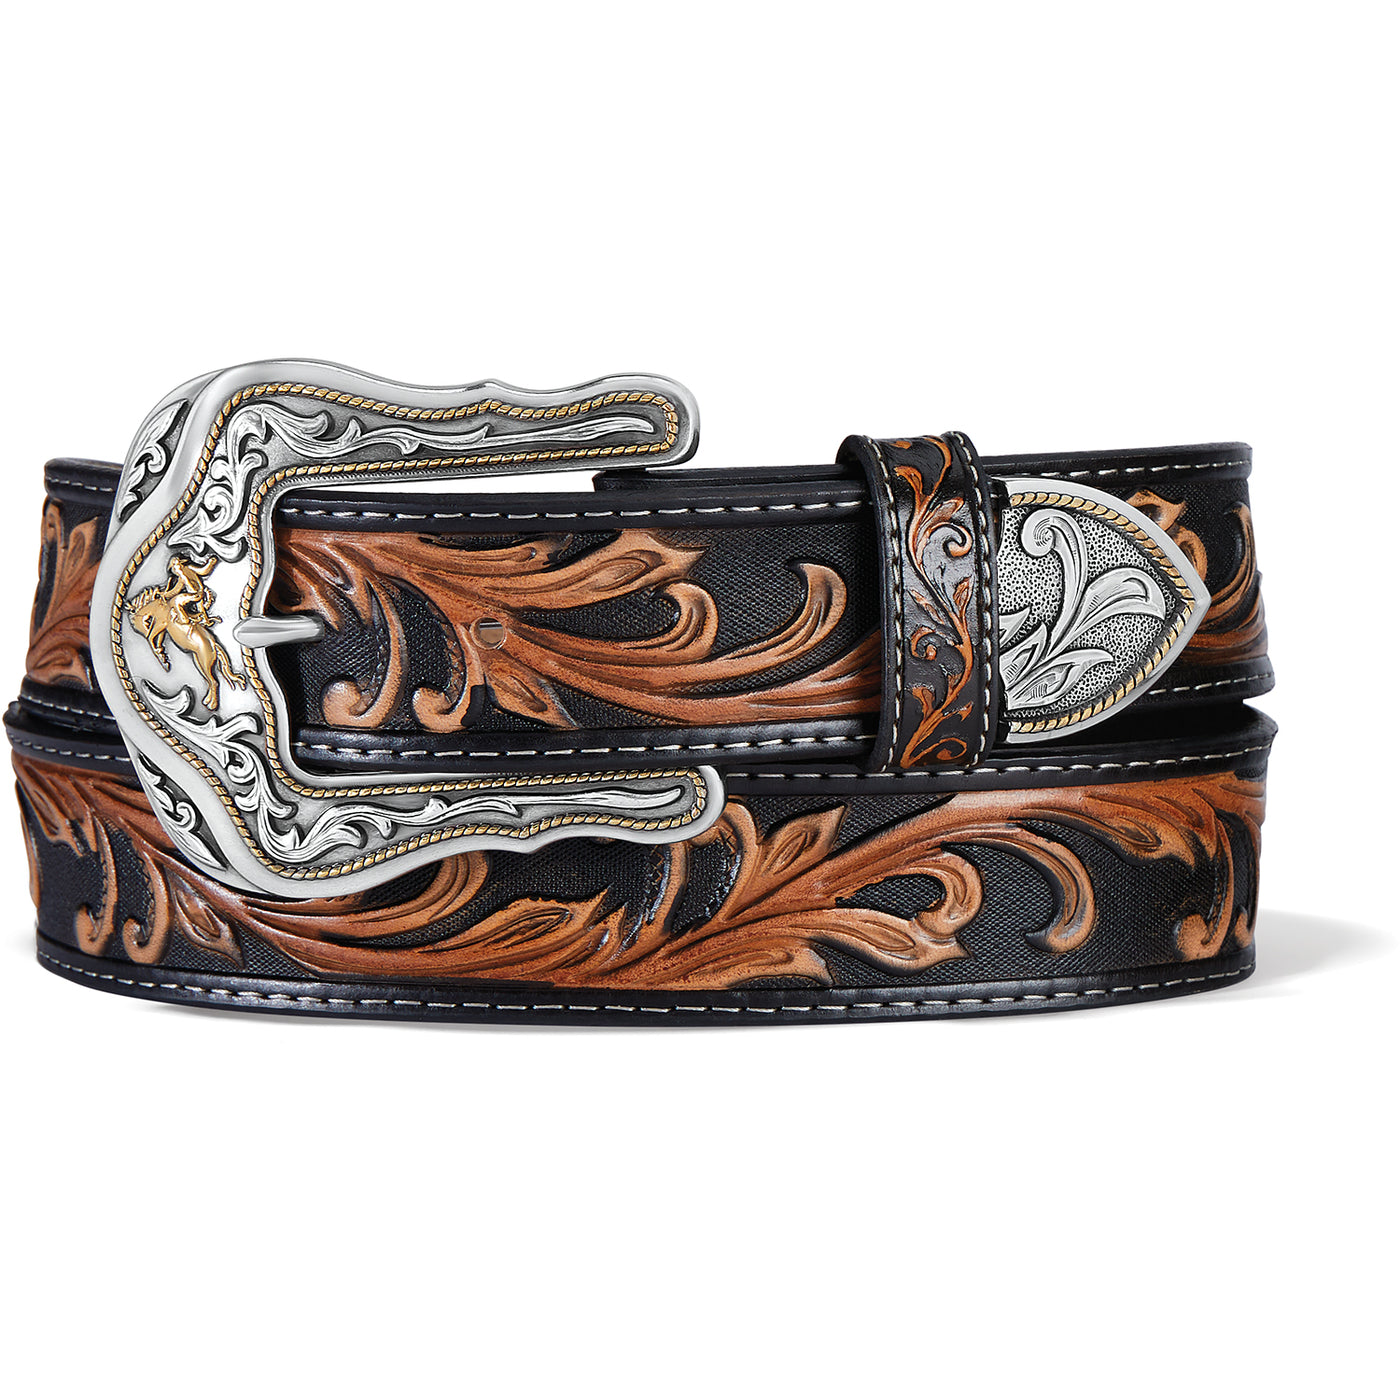 The beauty of this tooled belt is in the hand-antiqued black and tan colors that bring out its rich textural pattern. A silver- and gold-plated two-piece buckle set echoes the design on the strap. Proudly handcrafted in the USA with imported materials. Belt is 1 1/2" wide in classic solid black with black stitching along edges of the belt. Made in USA by Brighton for Tony Lama. Available at our Smyrna, TN shop just outside Nashville.